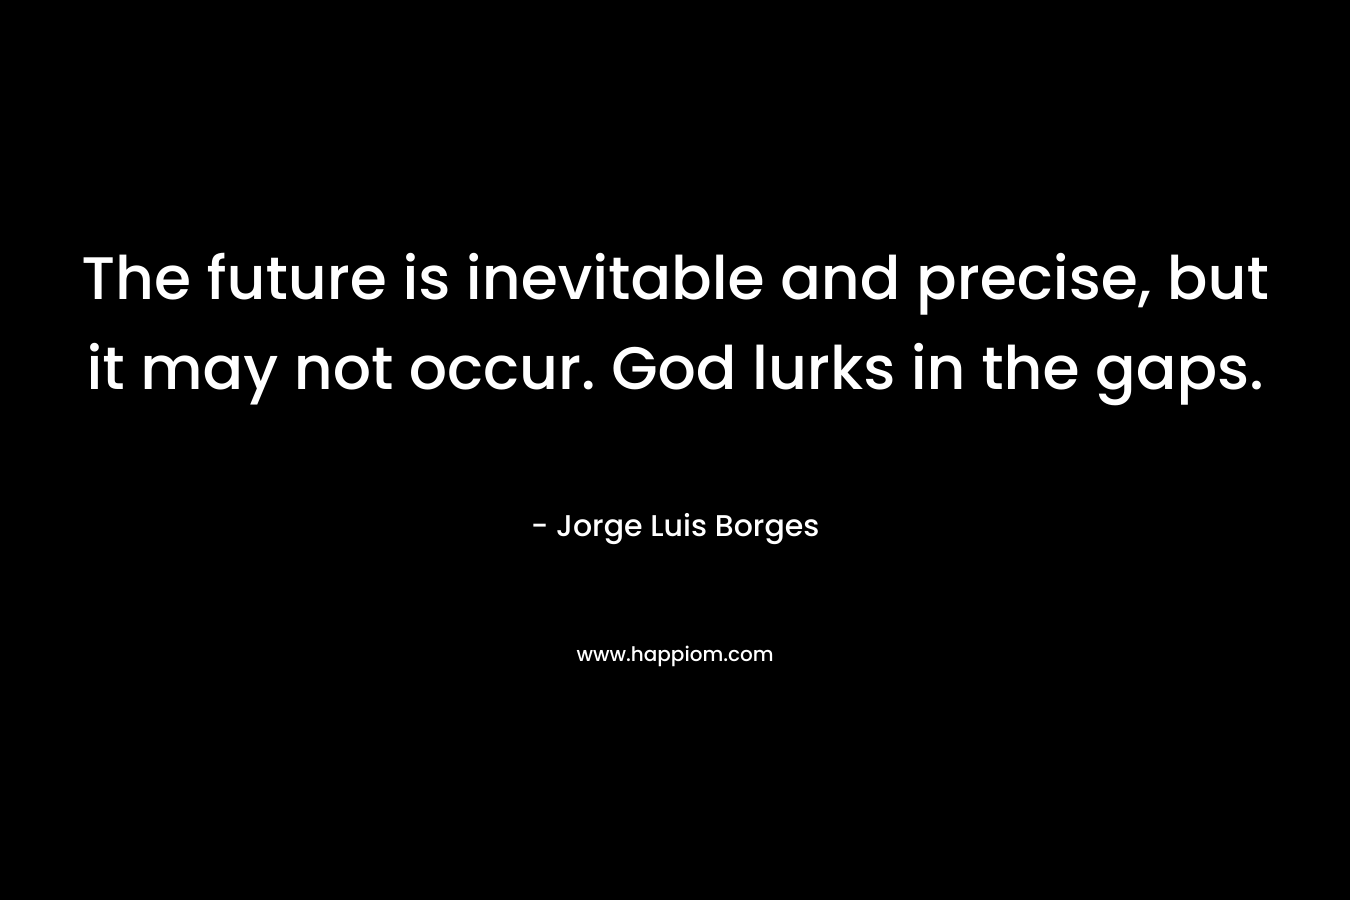 The future is inevitable and precise, but it may not occur. God lurks in the gaps.